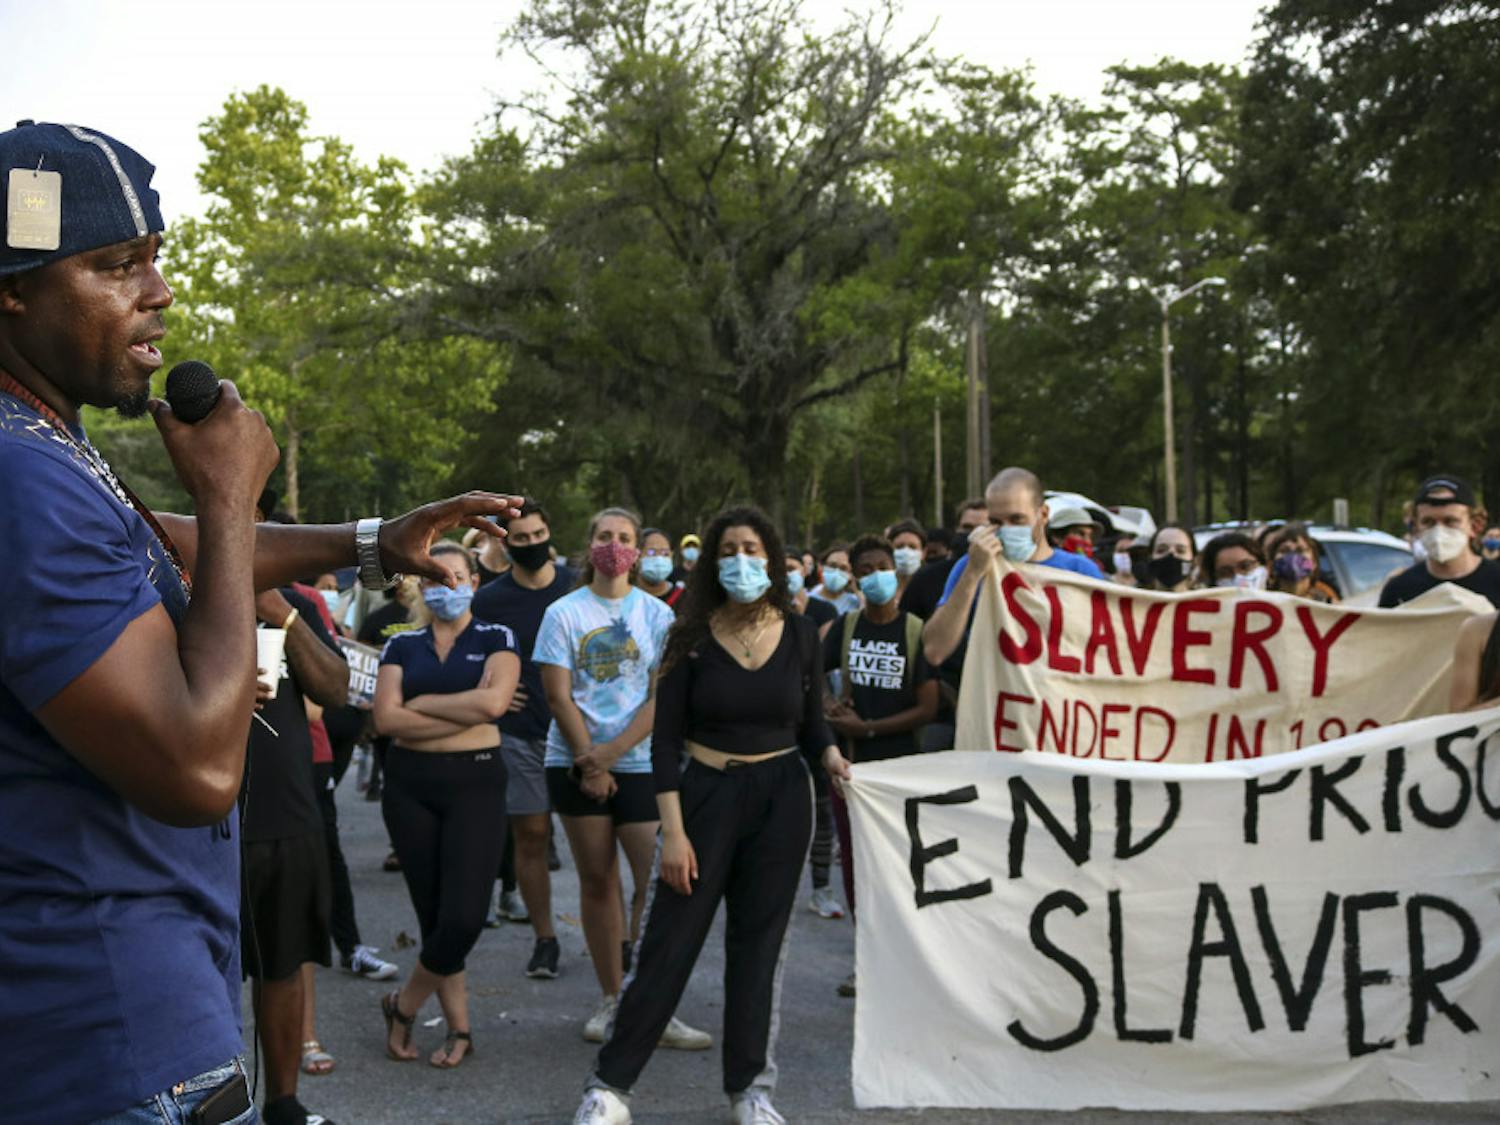 On June 19, about 150 people gathered outside of the Alachua County Jail to protest mass incarceration, police brutality and observe Juneteenth. ⁣
“This is the physical embodiment of all those injustices,” said Maria Dozier, a 20-year-old UF sustainability in the built environment senior. “This is a big, concrete building holding people inside that are supposed to be getting reformed, but instead they’re suffering from police brutality and other injustices every day.”⁣